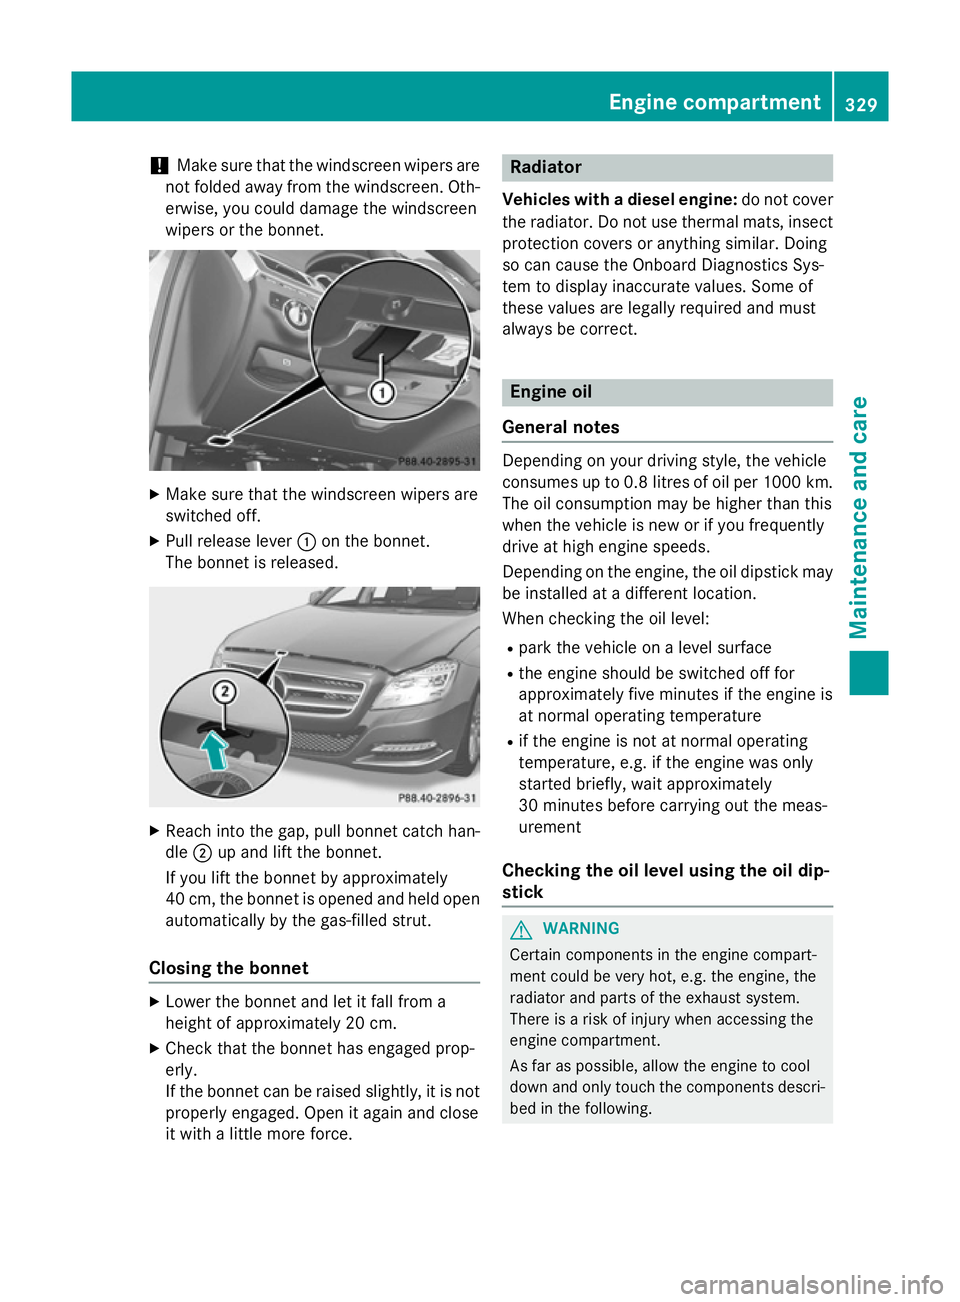 MERCEDES-BENZ CLS COUPE 2014  Owners Manual !
Make sure that the windscreen wipers are
not folded away from the windscreen. Oth-
erwise, you could damage the windscreen
wipers or the bonnet. X
Make sure that the windscreen wipers are
switched o